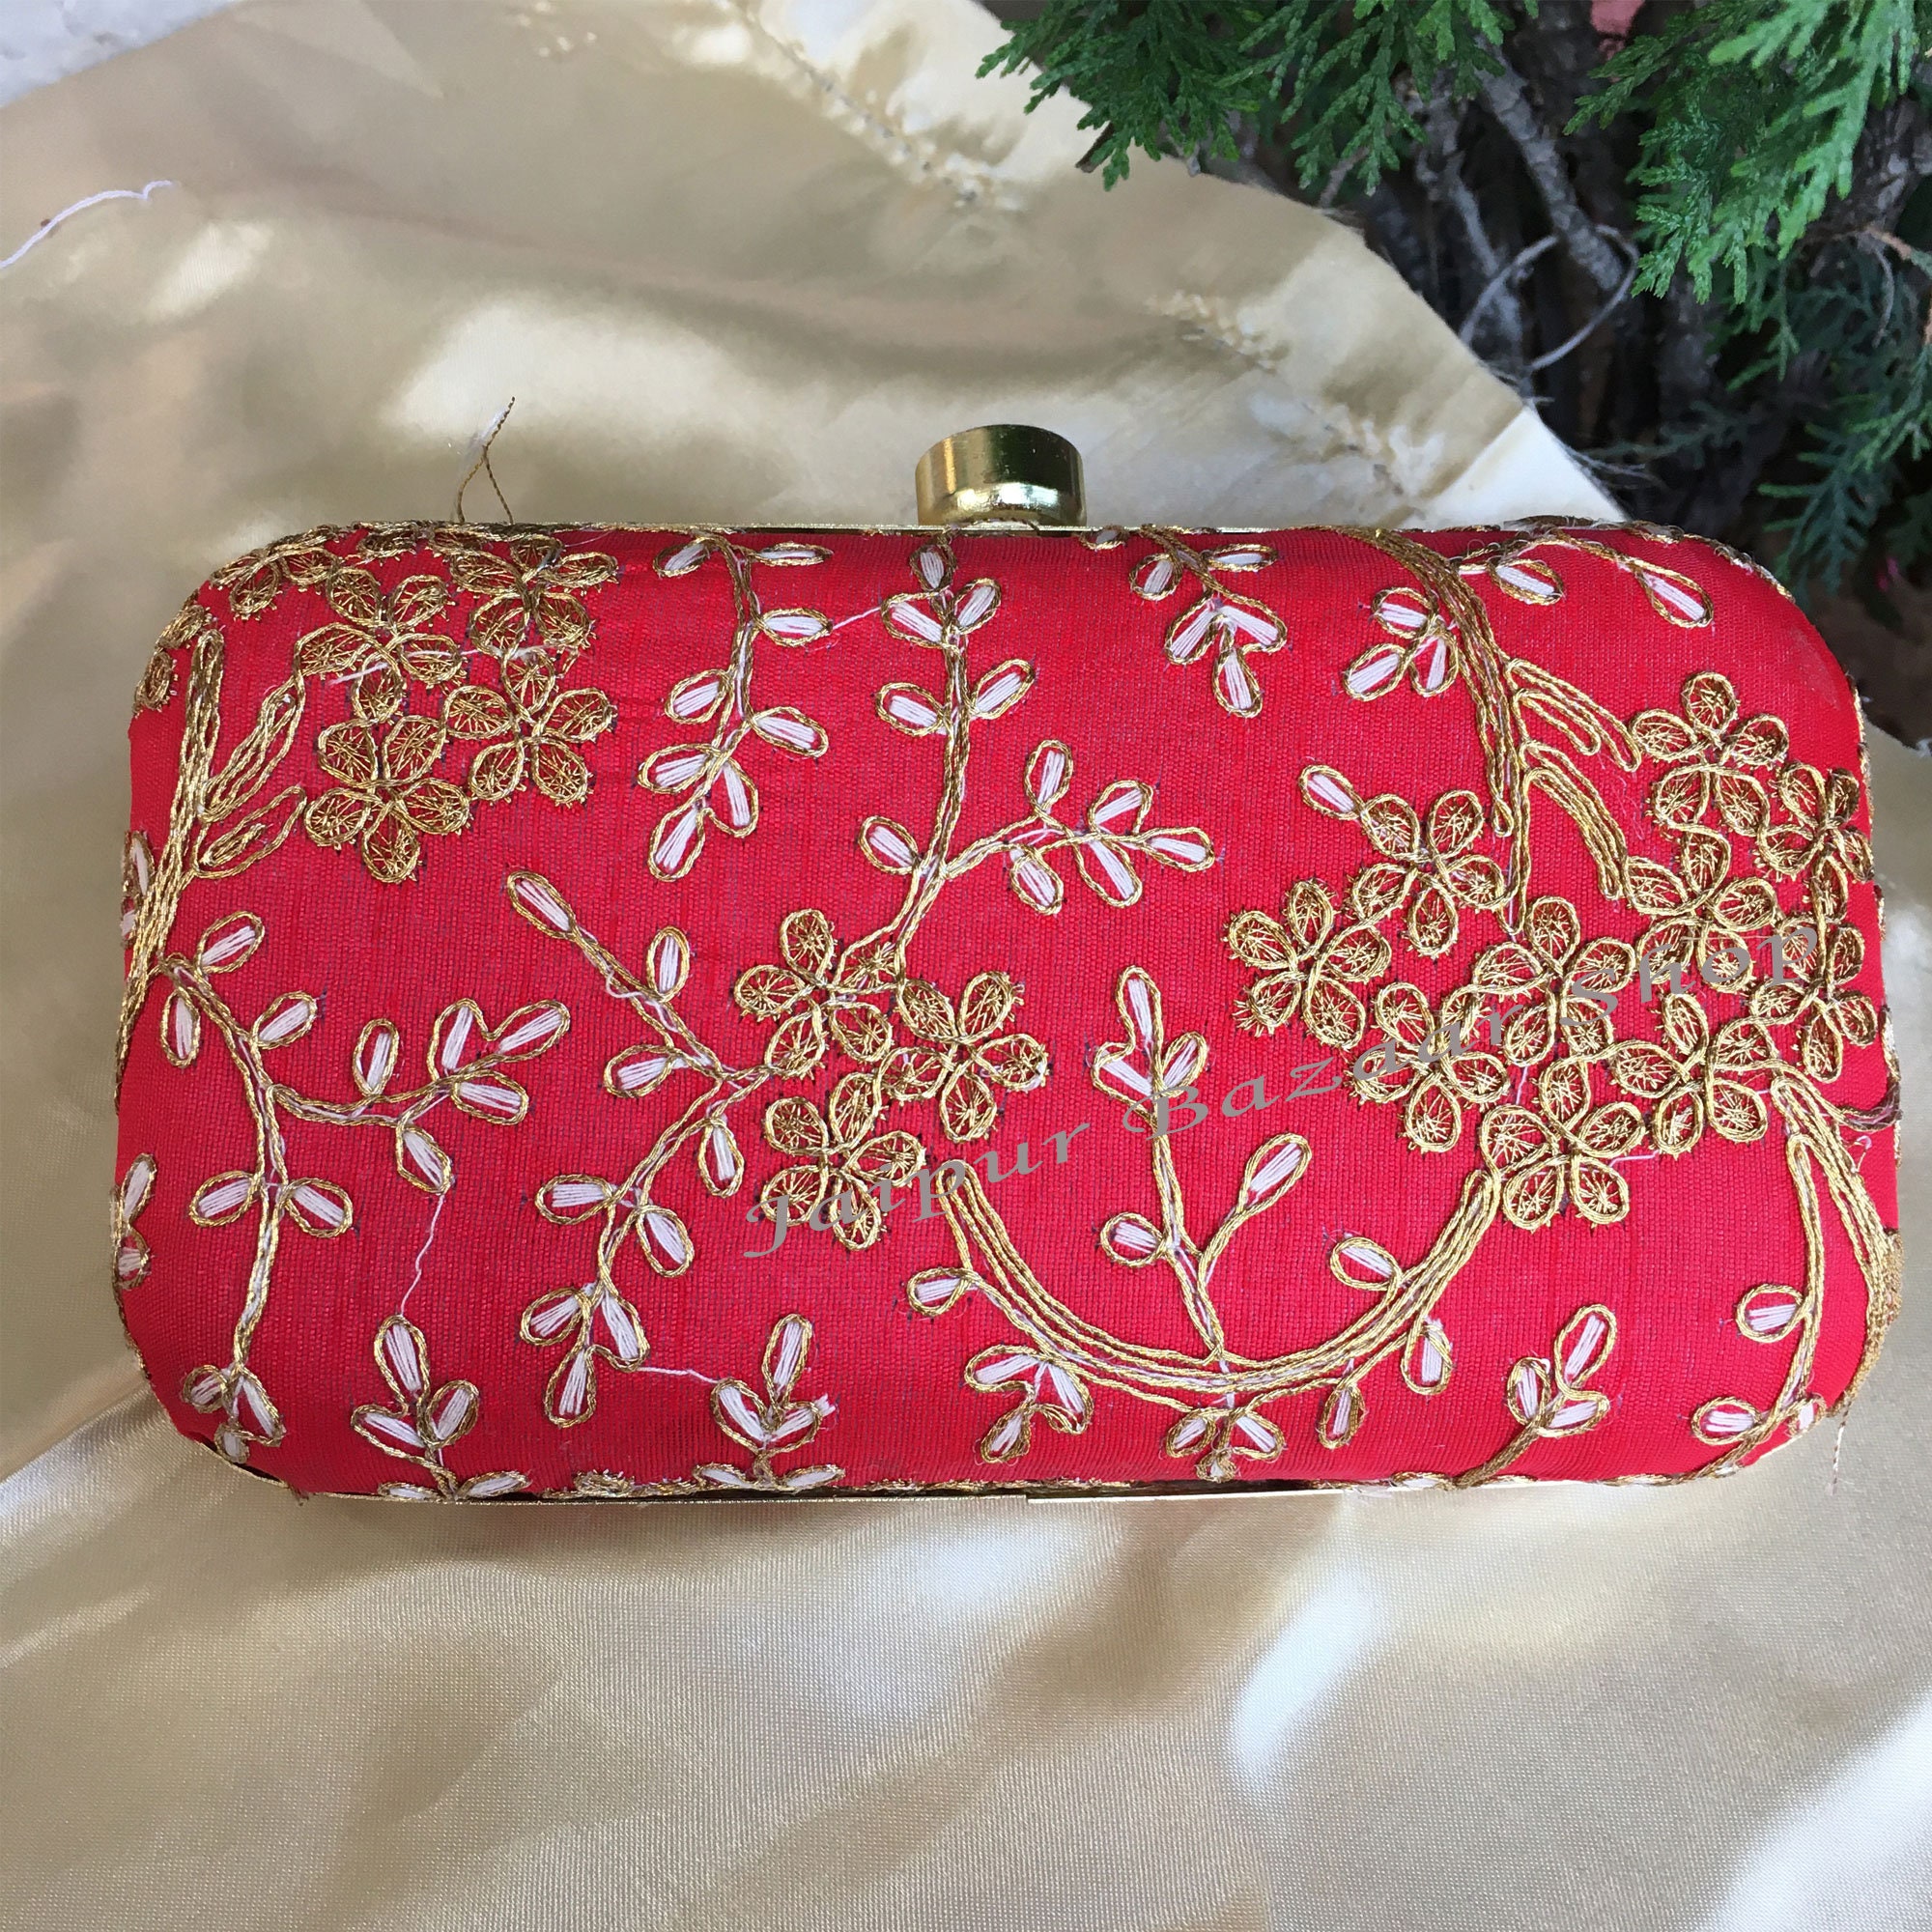 Just the right size. Bag in red color. Hand bag designed with rhinestones.  Clutch bag in female hands. Mini bag. Fashion handbag. Fashion accessory.  Vintage or retro clutch design. Classic purse -